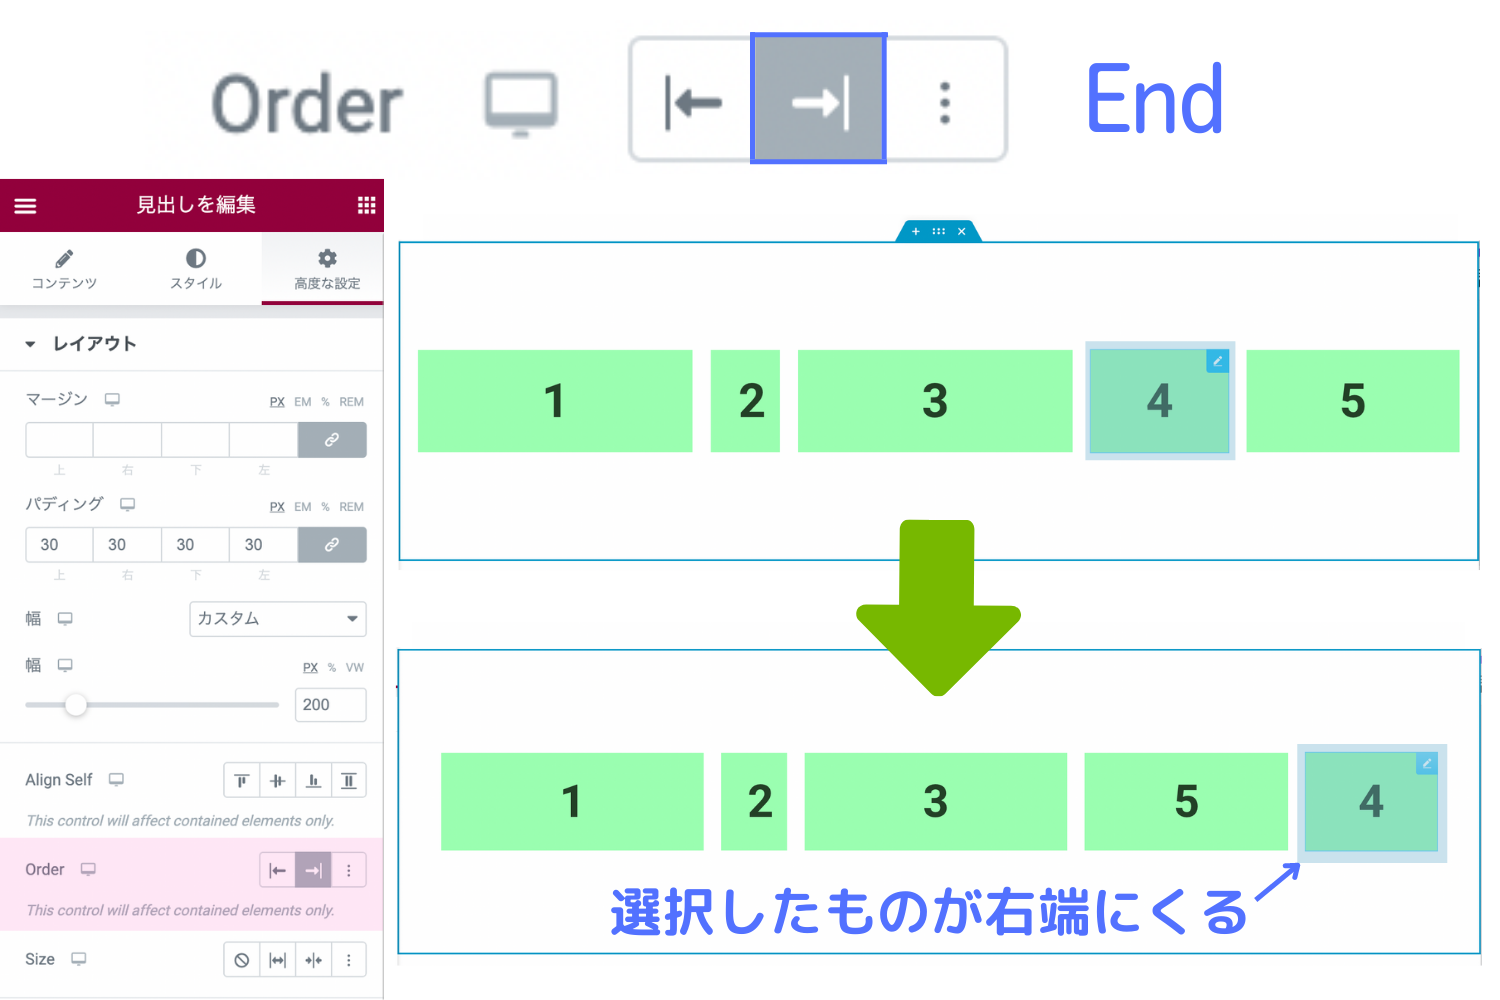 『Order』の『End』の説明